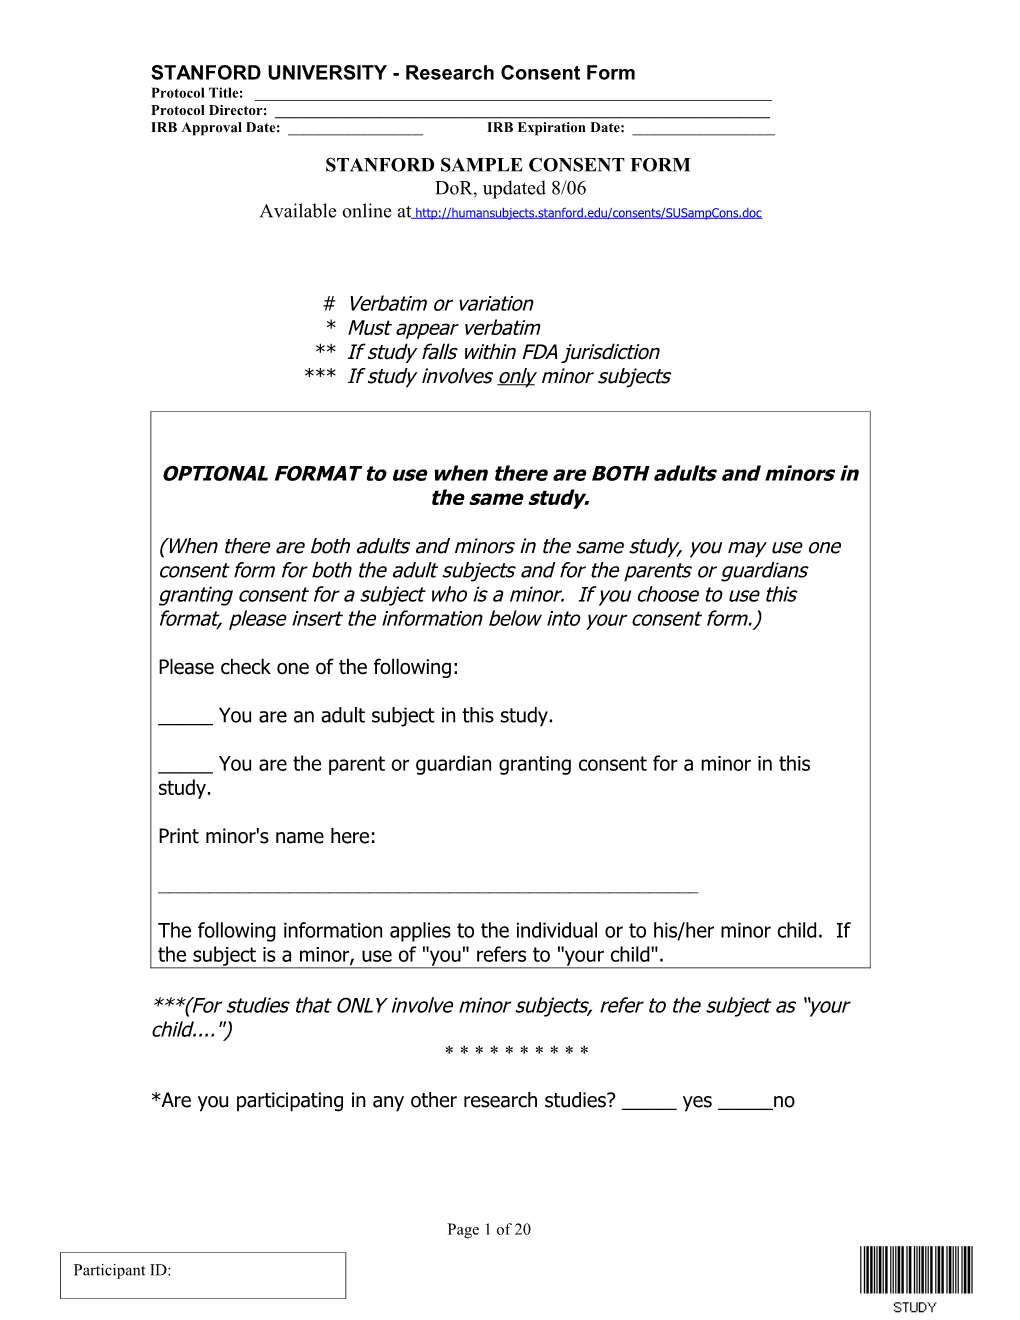 Stanford Sample Consent Form